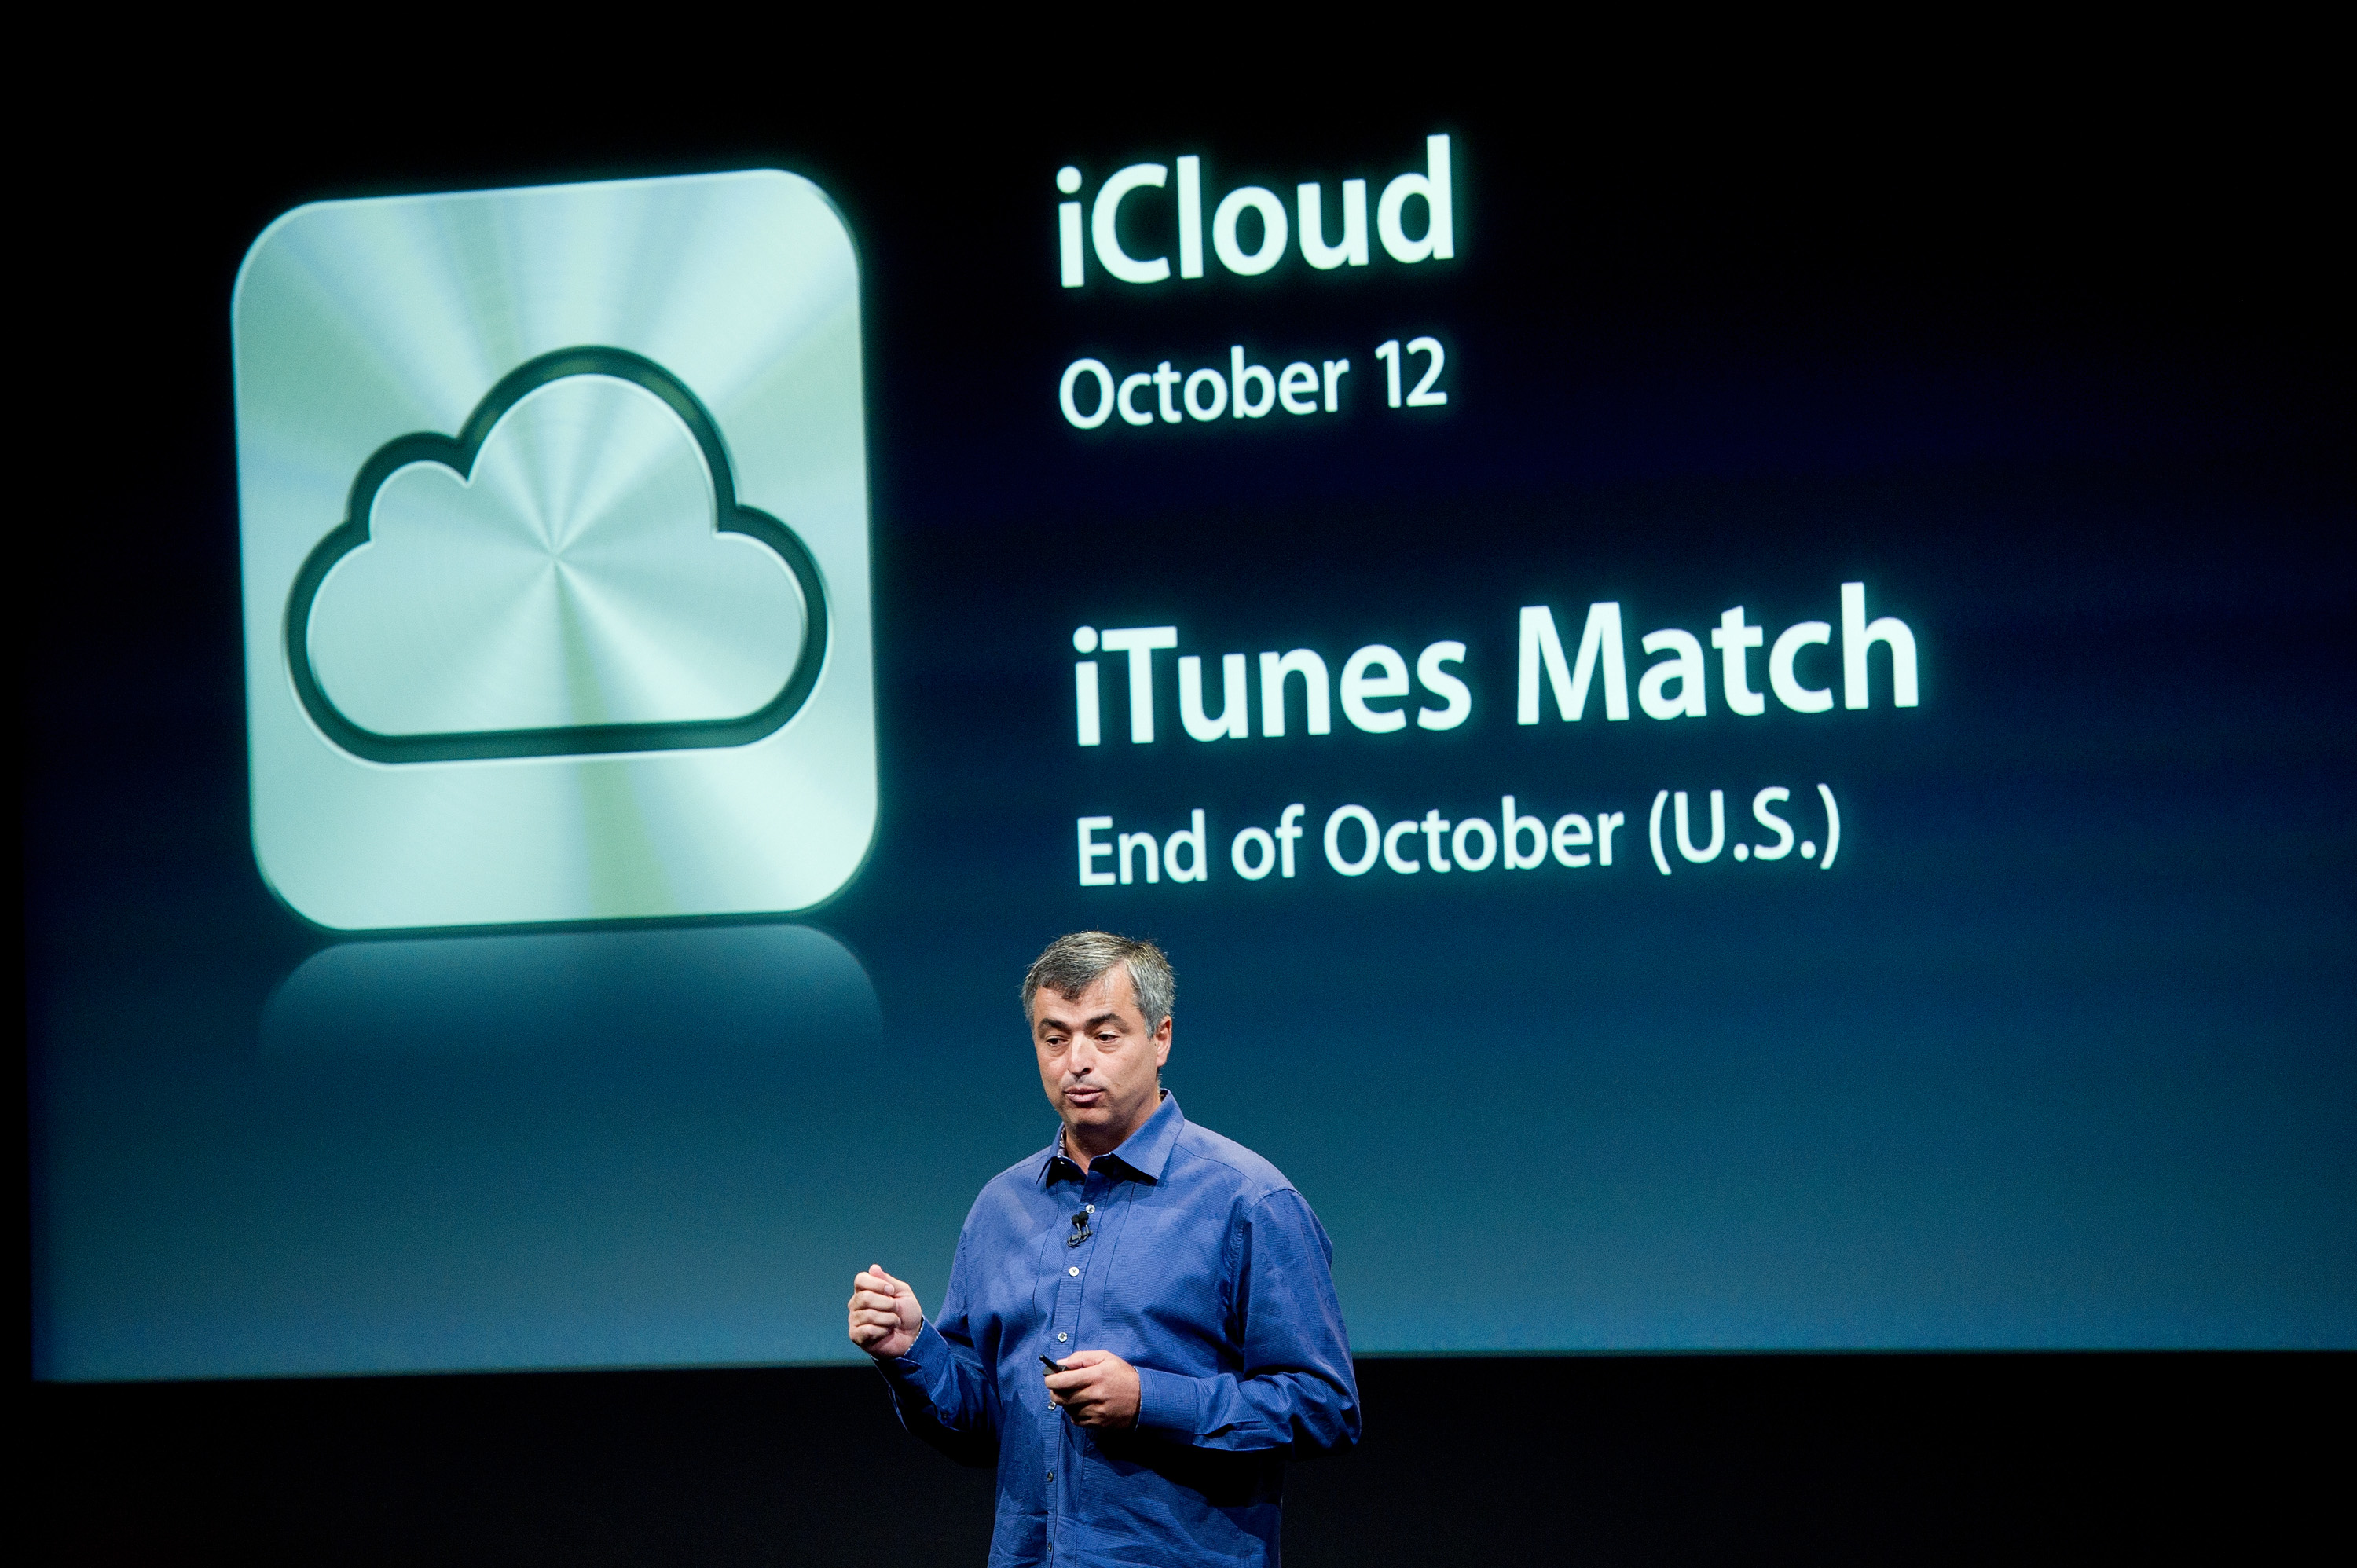 Eddie Cue, senior vice president of Internet Software and Services at Apple Inc., speaks about new features of the iCloud service during an event at the company's headquarters in Cupertino, California, U.S., on Tuesday, Oct. 4, 2011. (Bloomberg&mdash;Bloomberg via Getty Images)